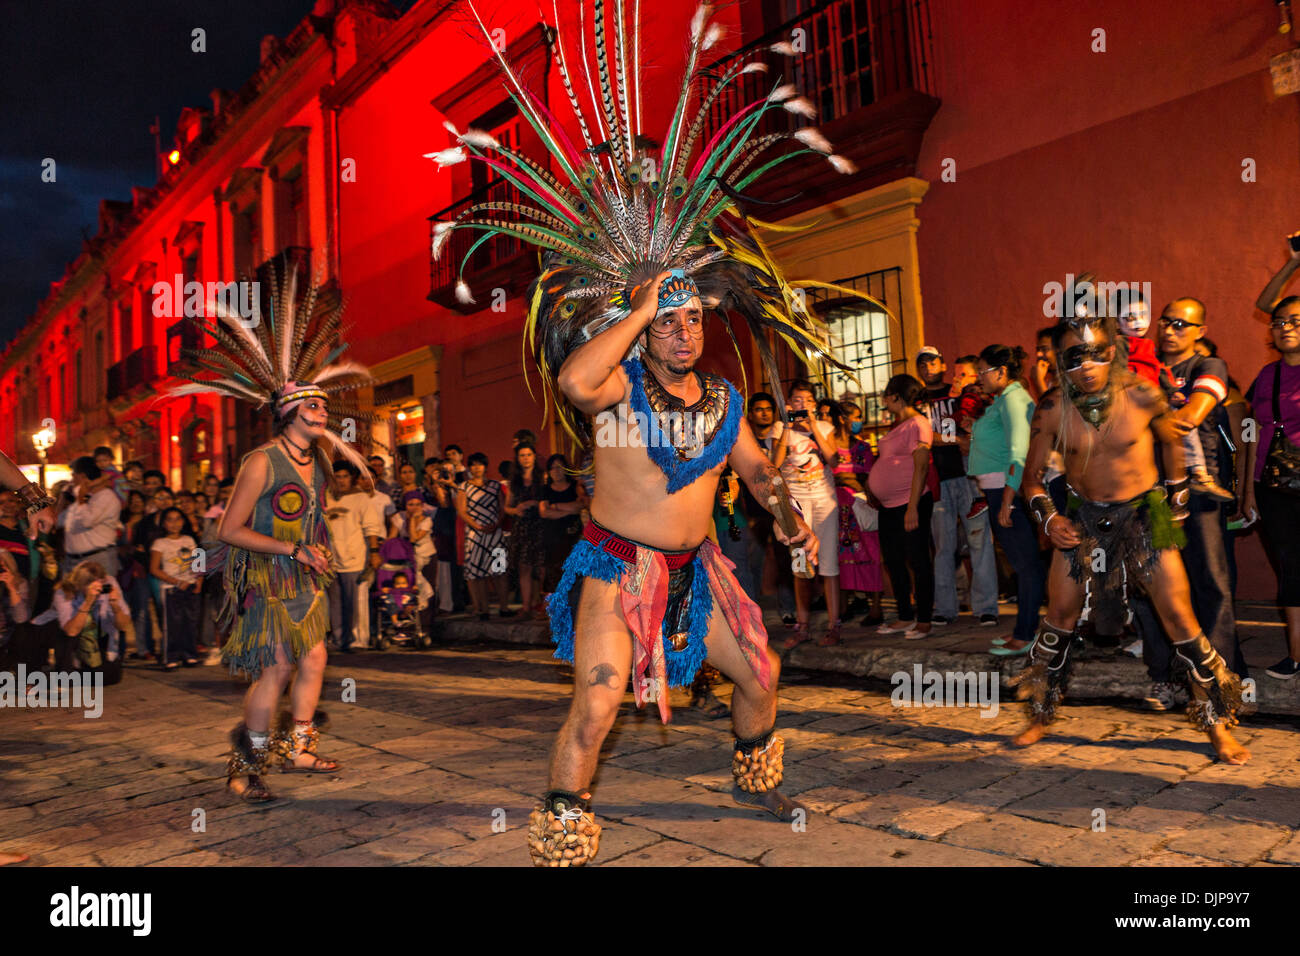 Costumed Mayan Indians celebrating the Day of the Dead festival November 1, 2013 in Oaxaca, Mexico. Stock Photo